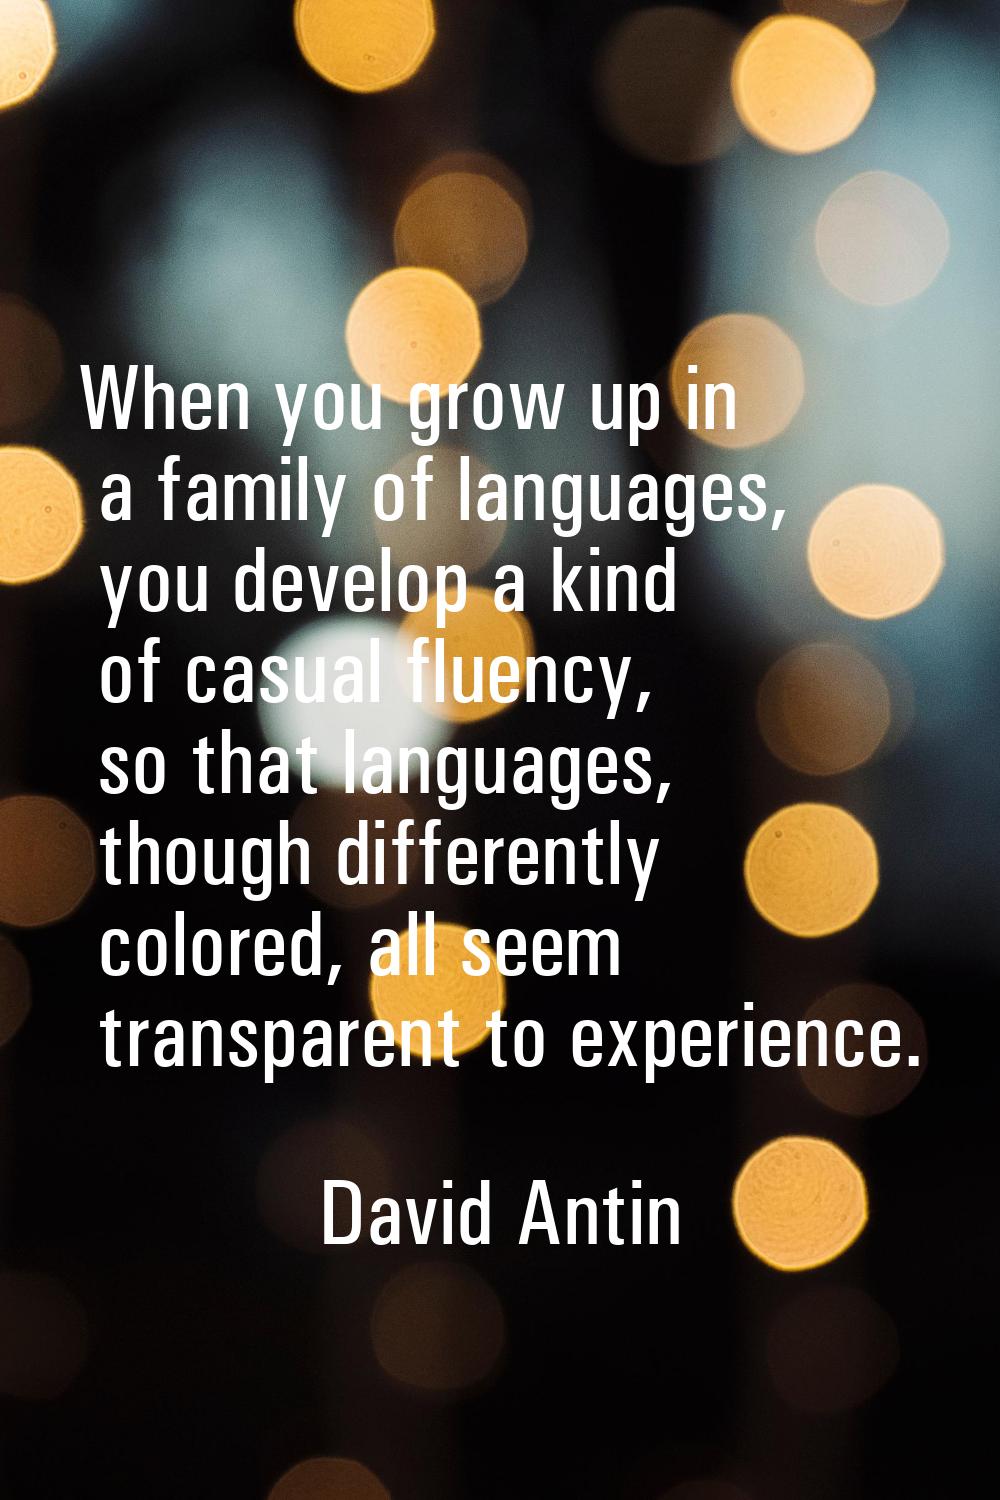 When you grow up in a family of languages, you develop a kind of casual fluency, so that languages,